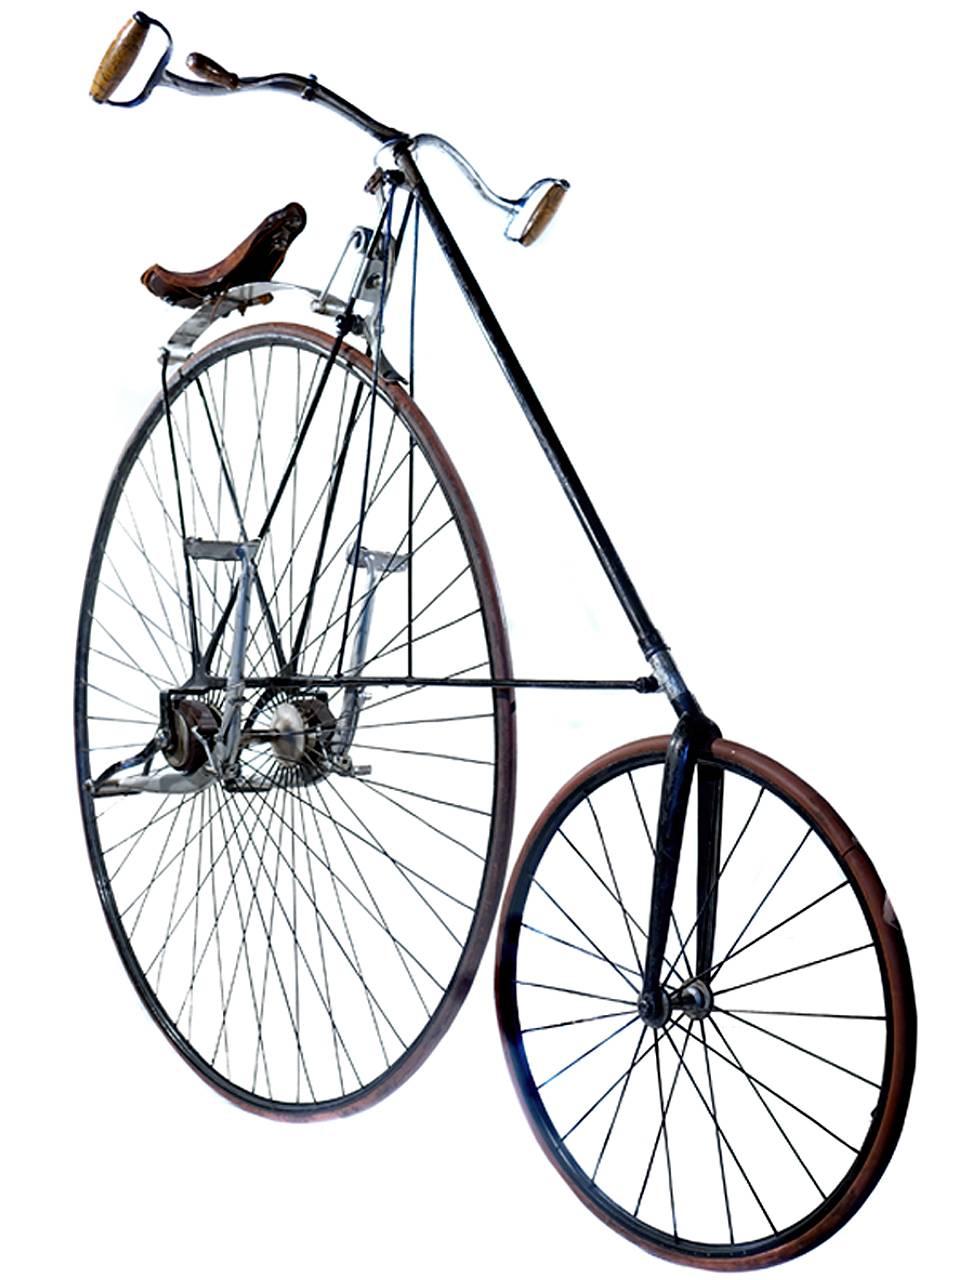 42 inch wheel, two speed Pony Star by H. B. Smith Machine Company of Smithville, New Jersey.

The reverse penny-farthing was a revolutionary design and considered one of the first safety bicycles. The Smithsonian has an example on display. The